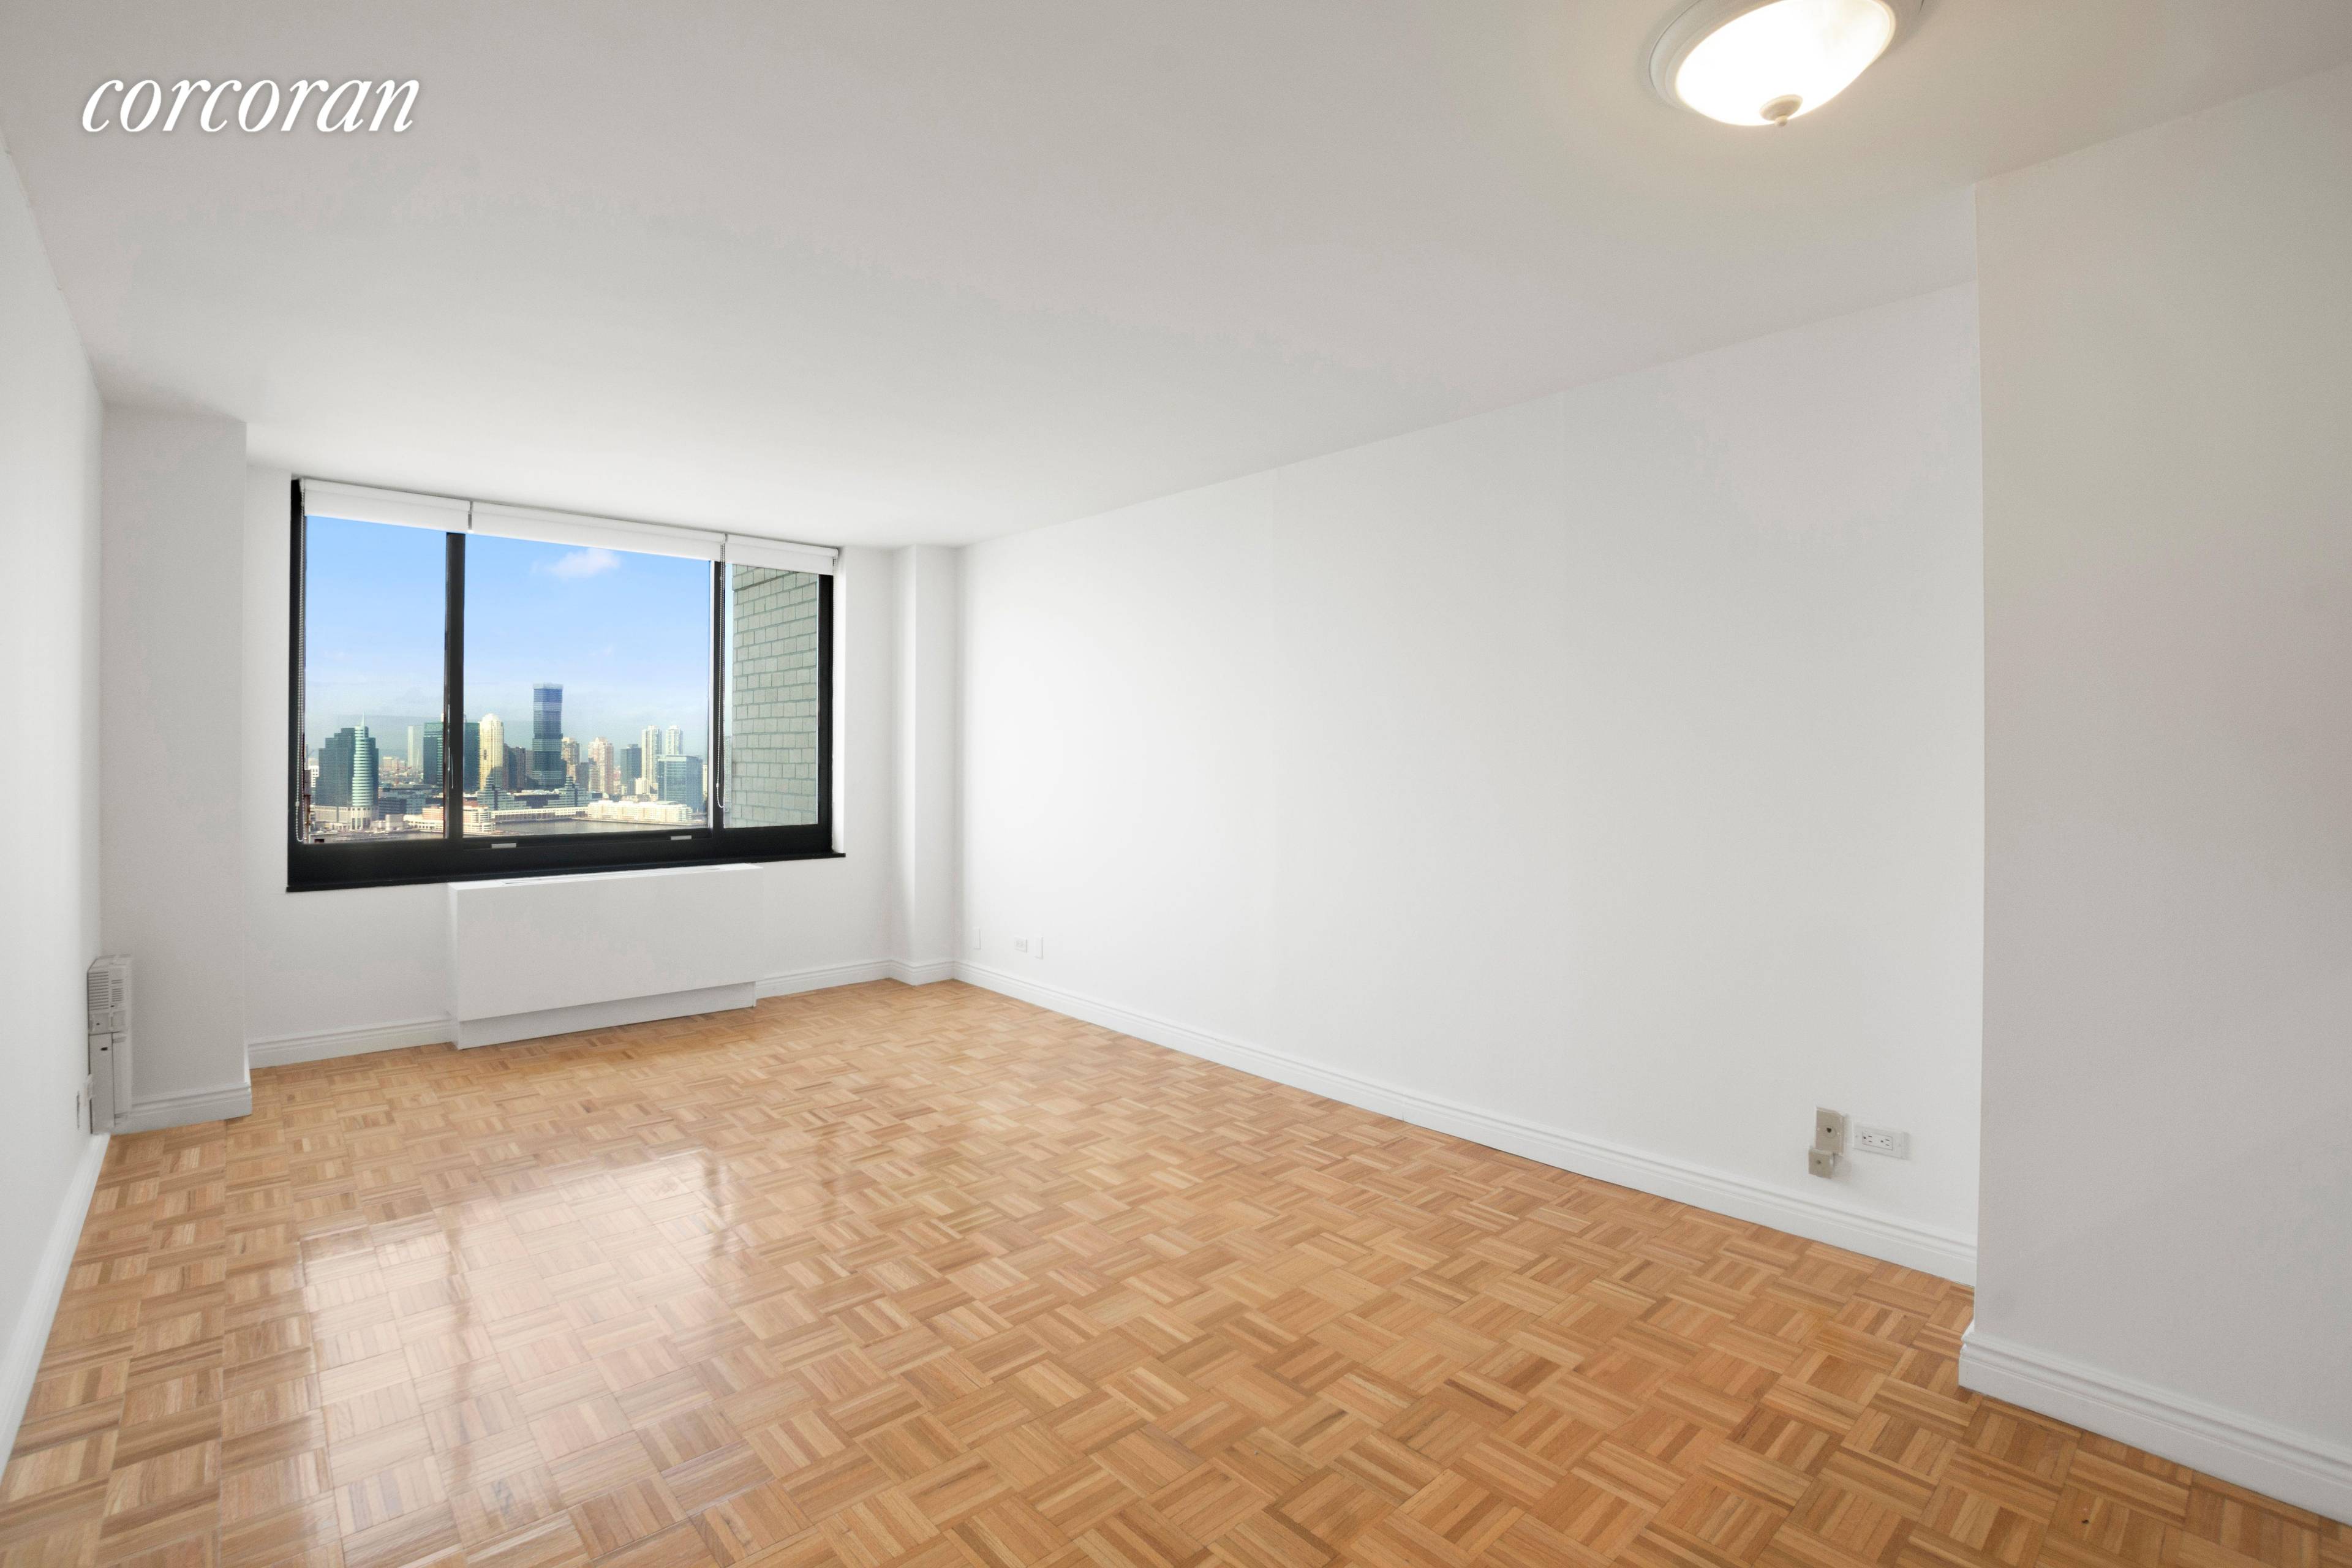 1 bedroom with river views in South Battery Park.